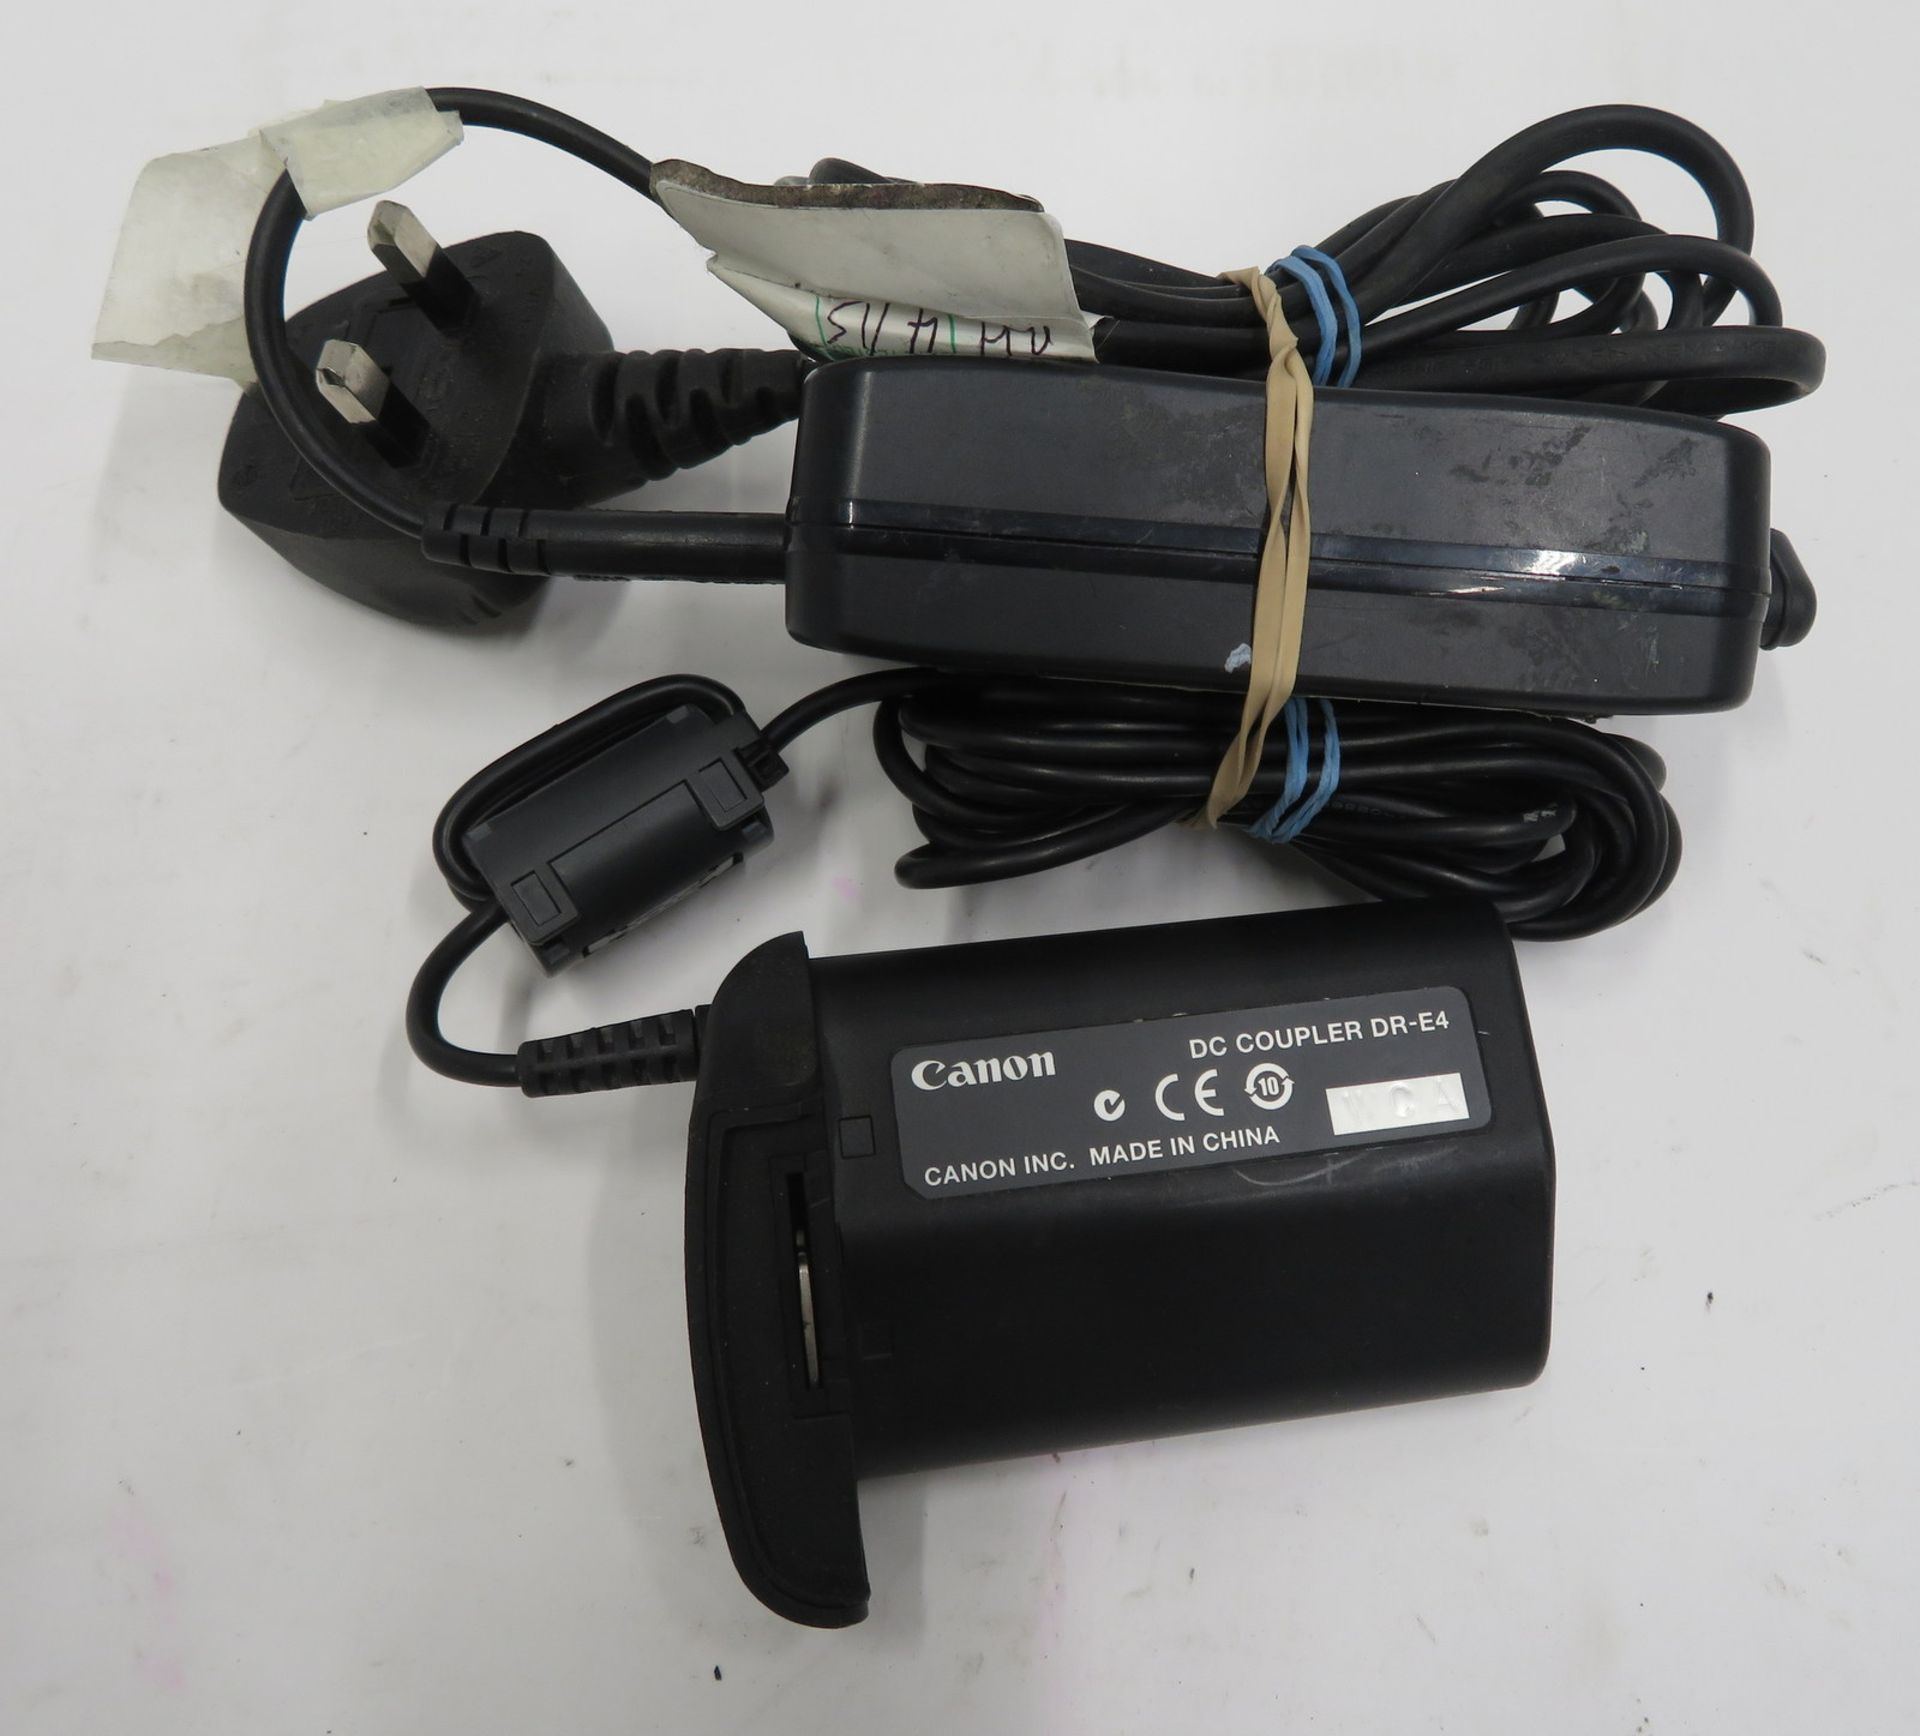 Canon DR-E4 DC coupler with mains adapter